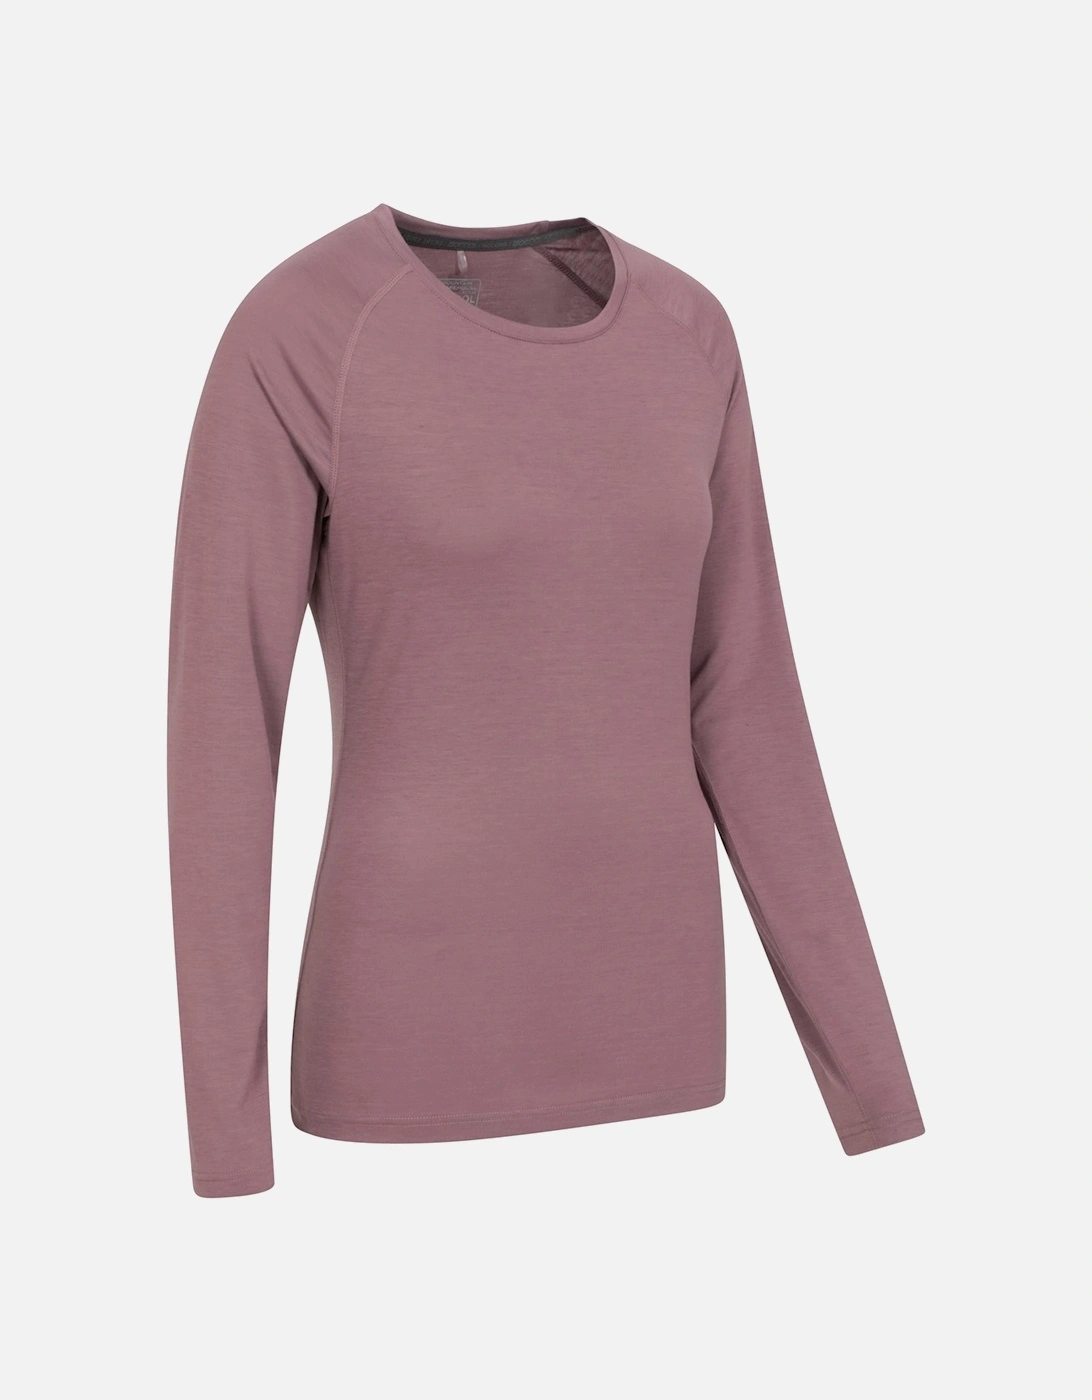 Womens/Ladies Quick Dry Long-Sleeved Top